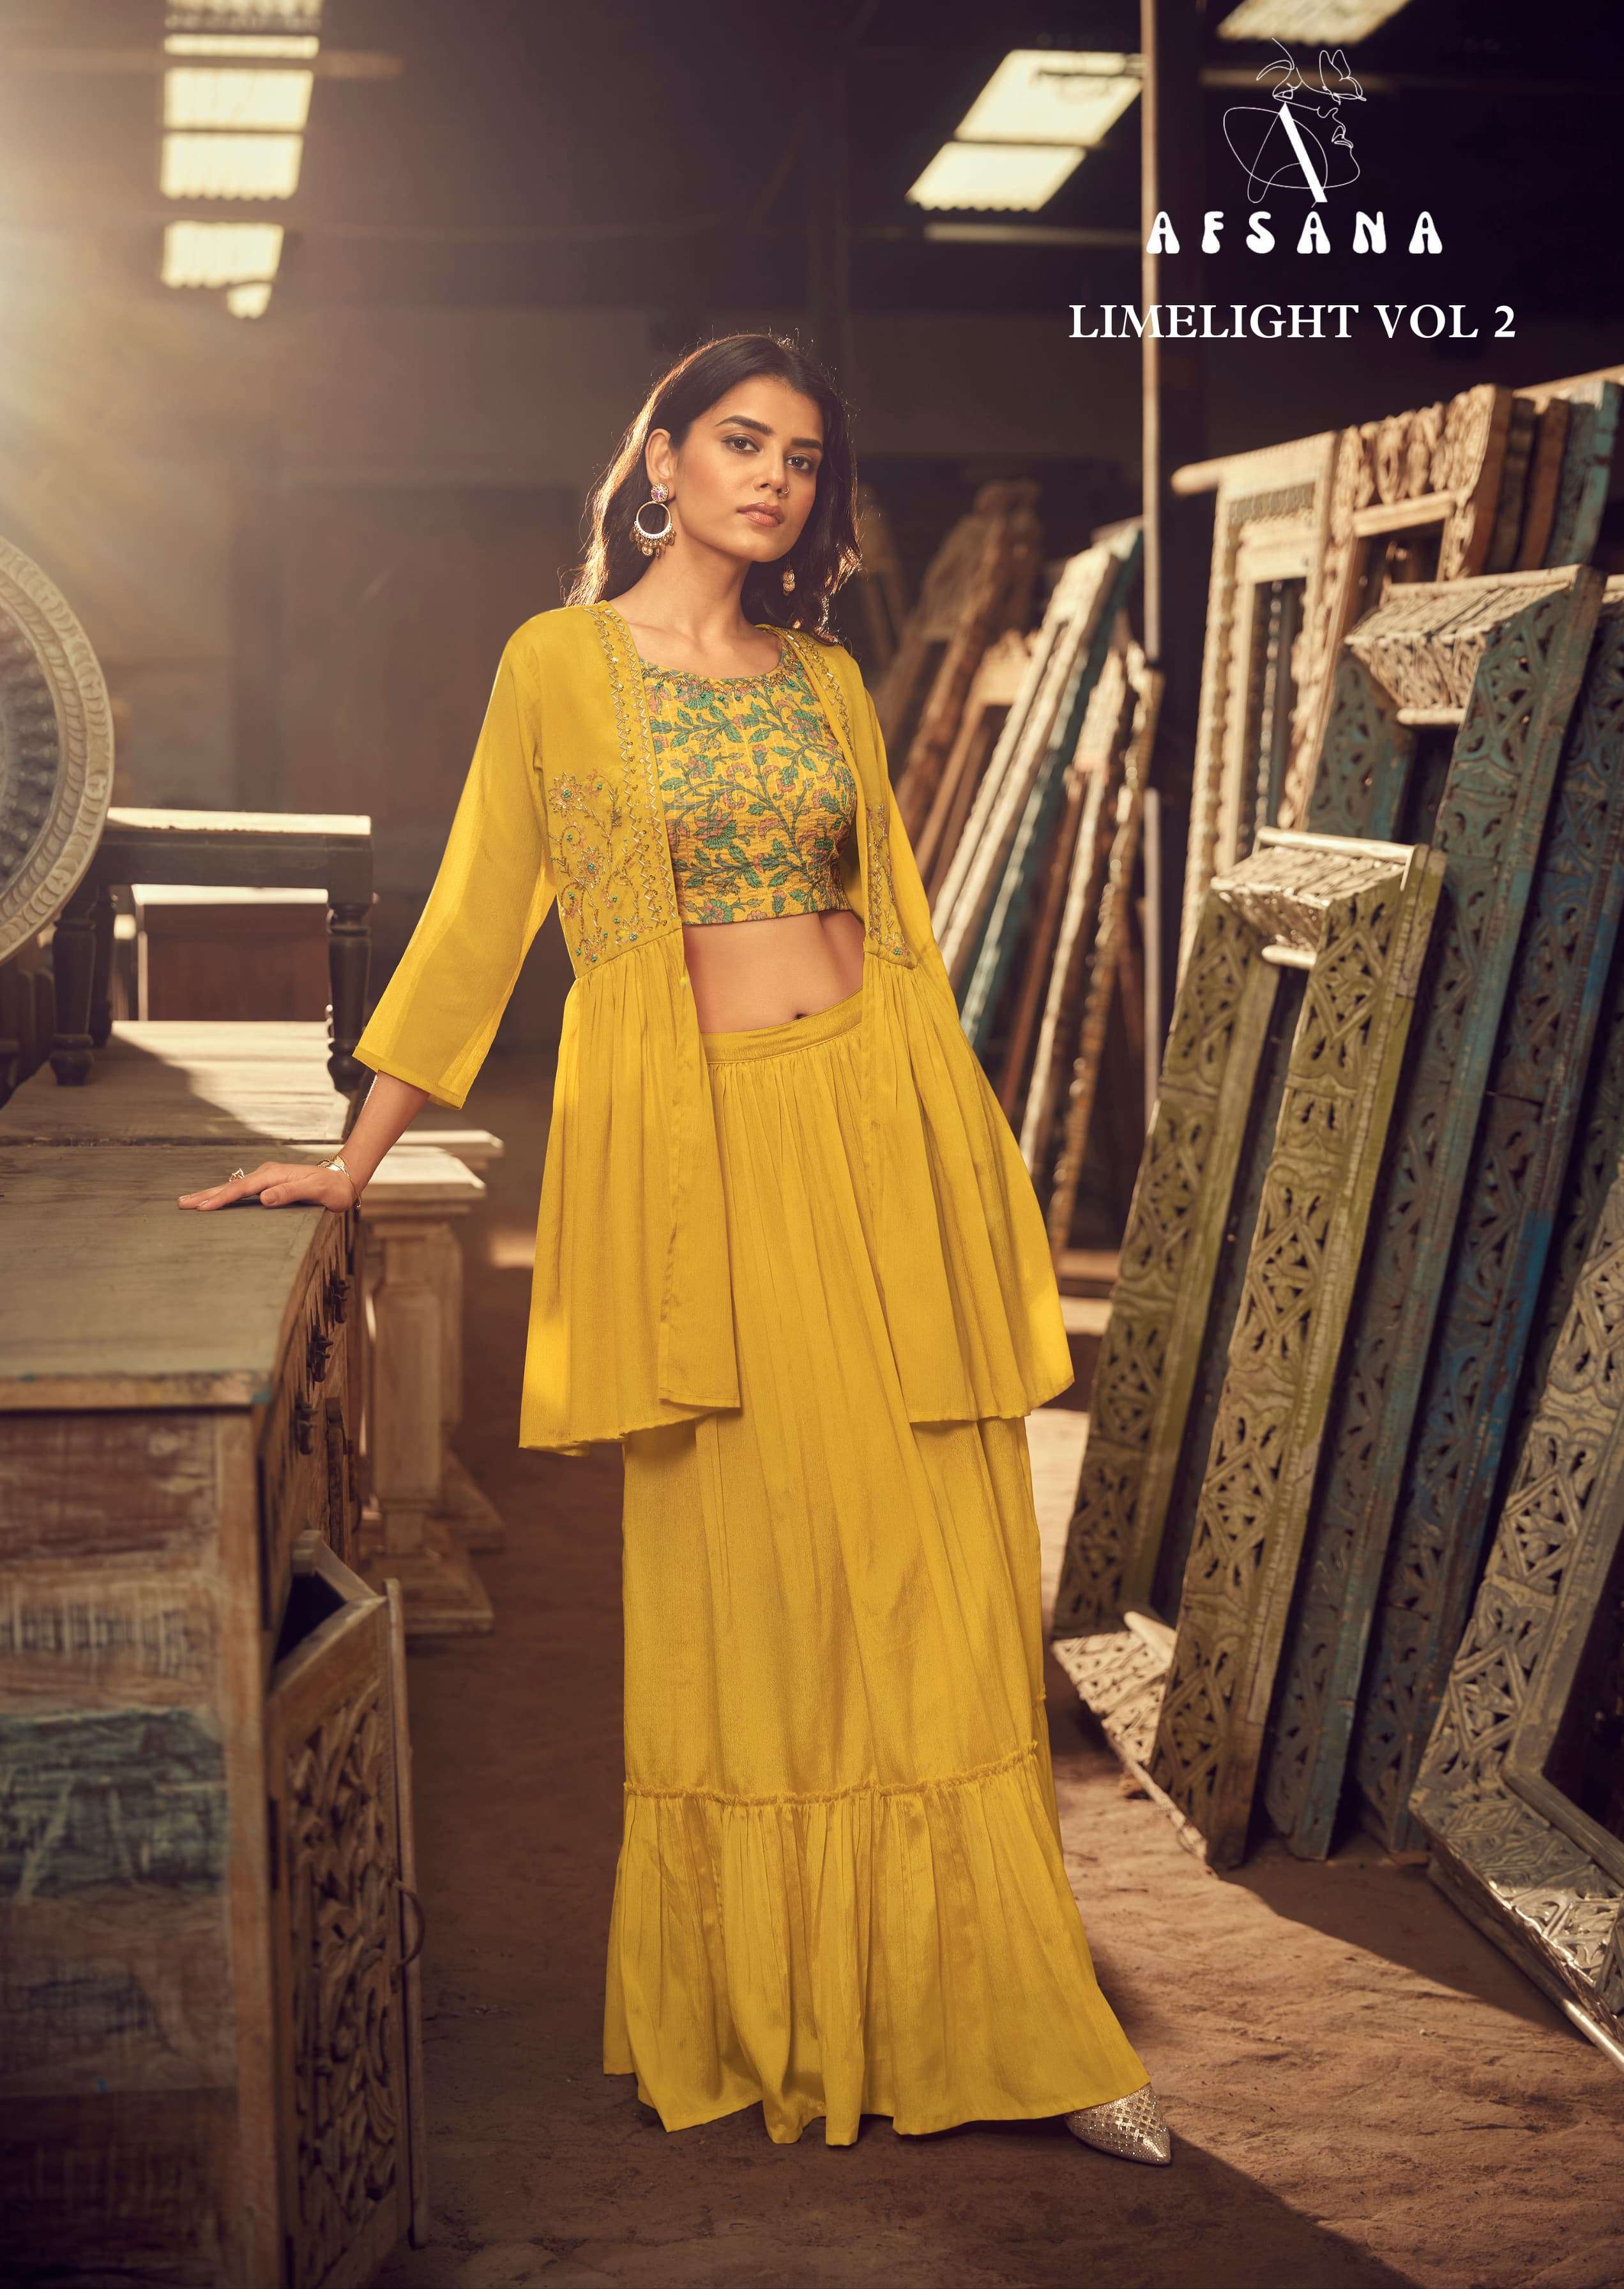 Afsana Limelight Vol 2 Partywear Shurg Style 3 Piece Crop Tops Designs Latest Collection